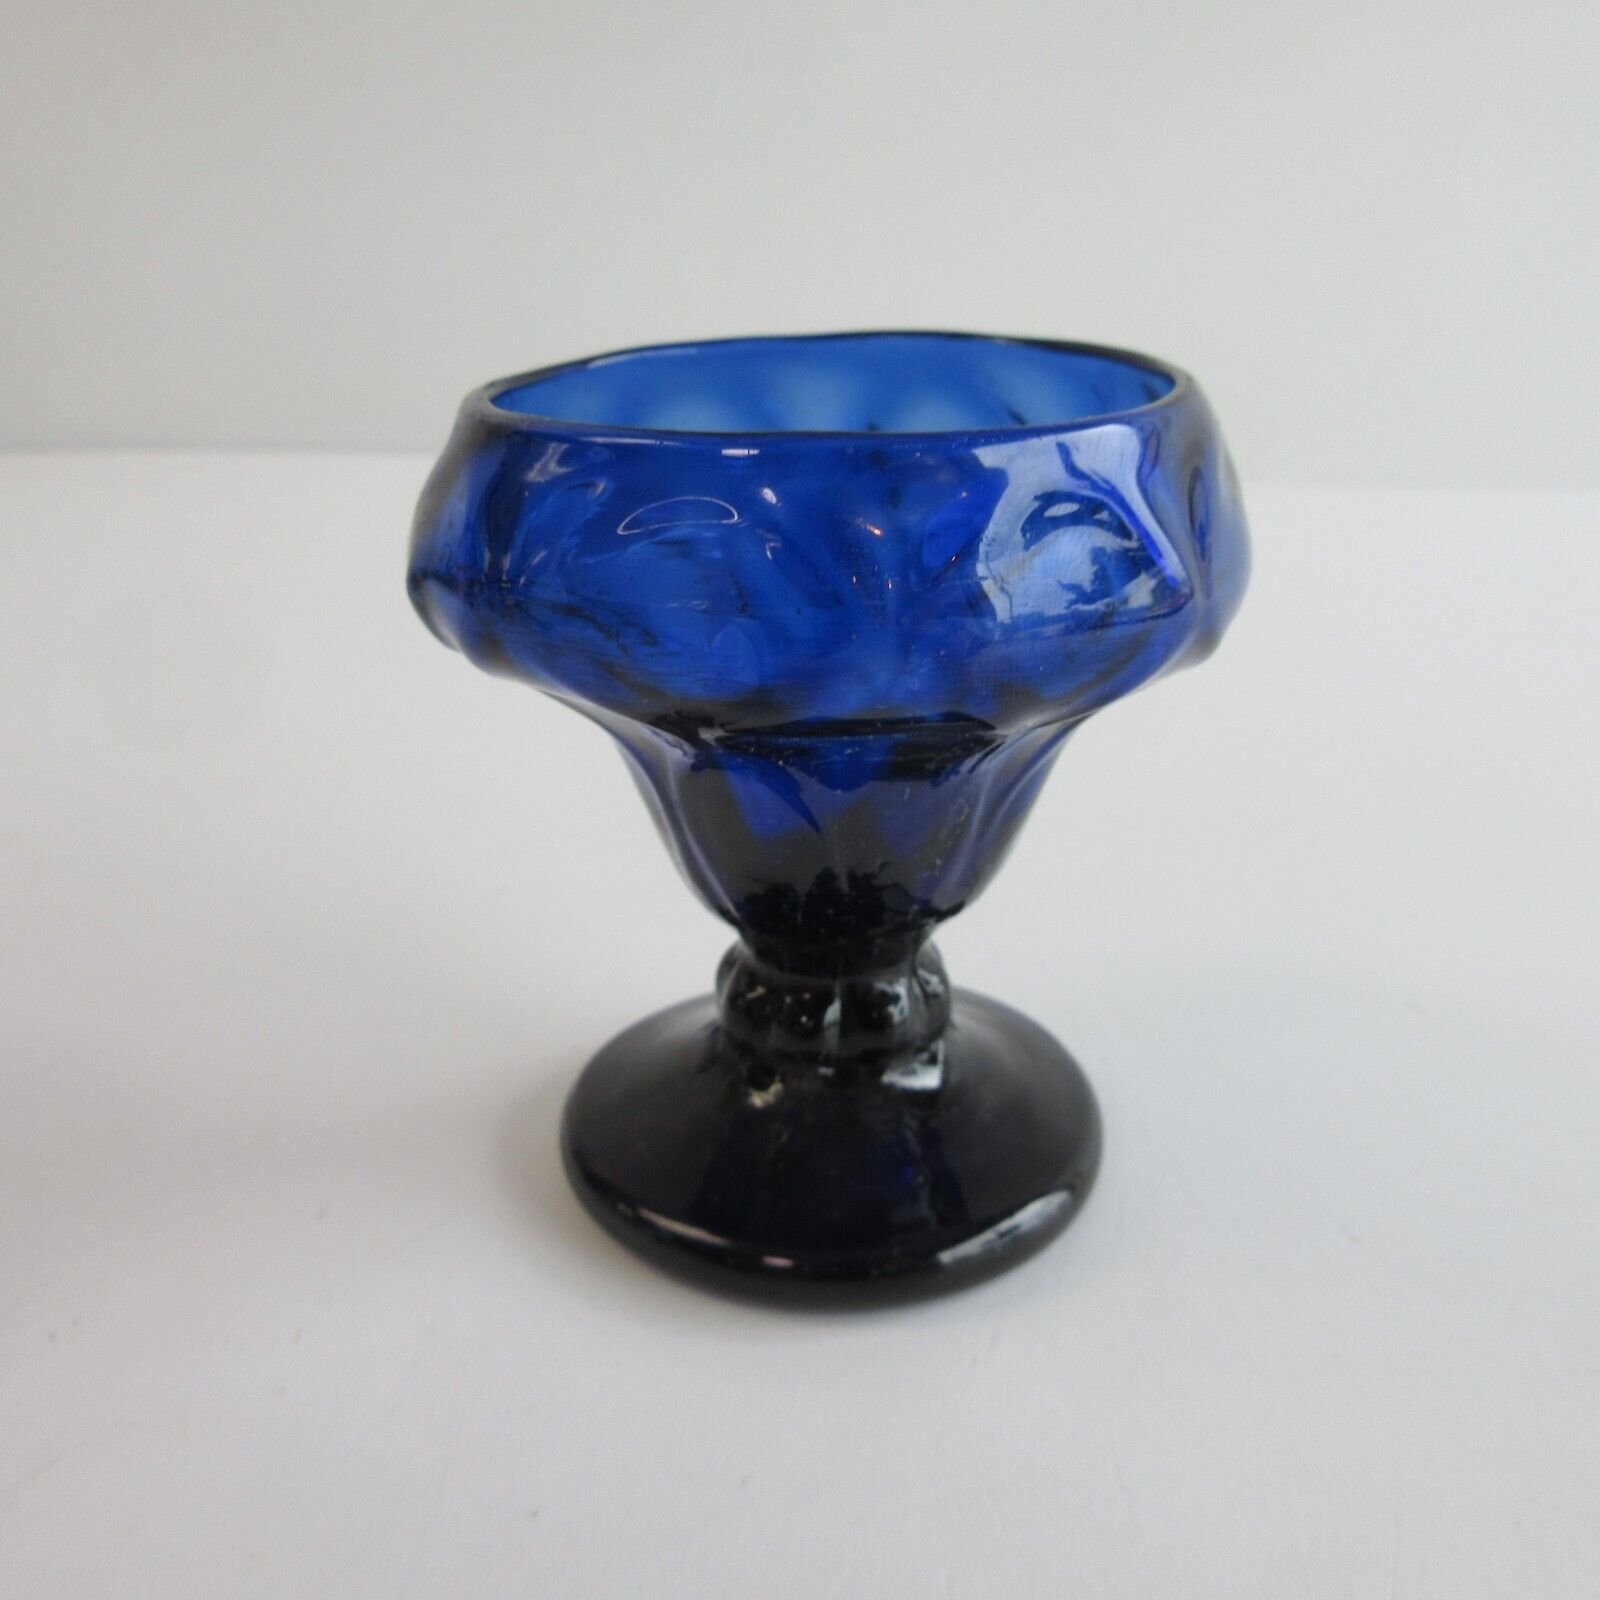 Antique Rare Blown Glass Blue Crude Footed Master Salt Cellar Pontil Early Glass